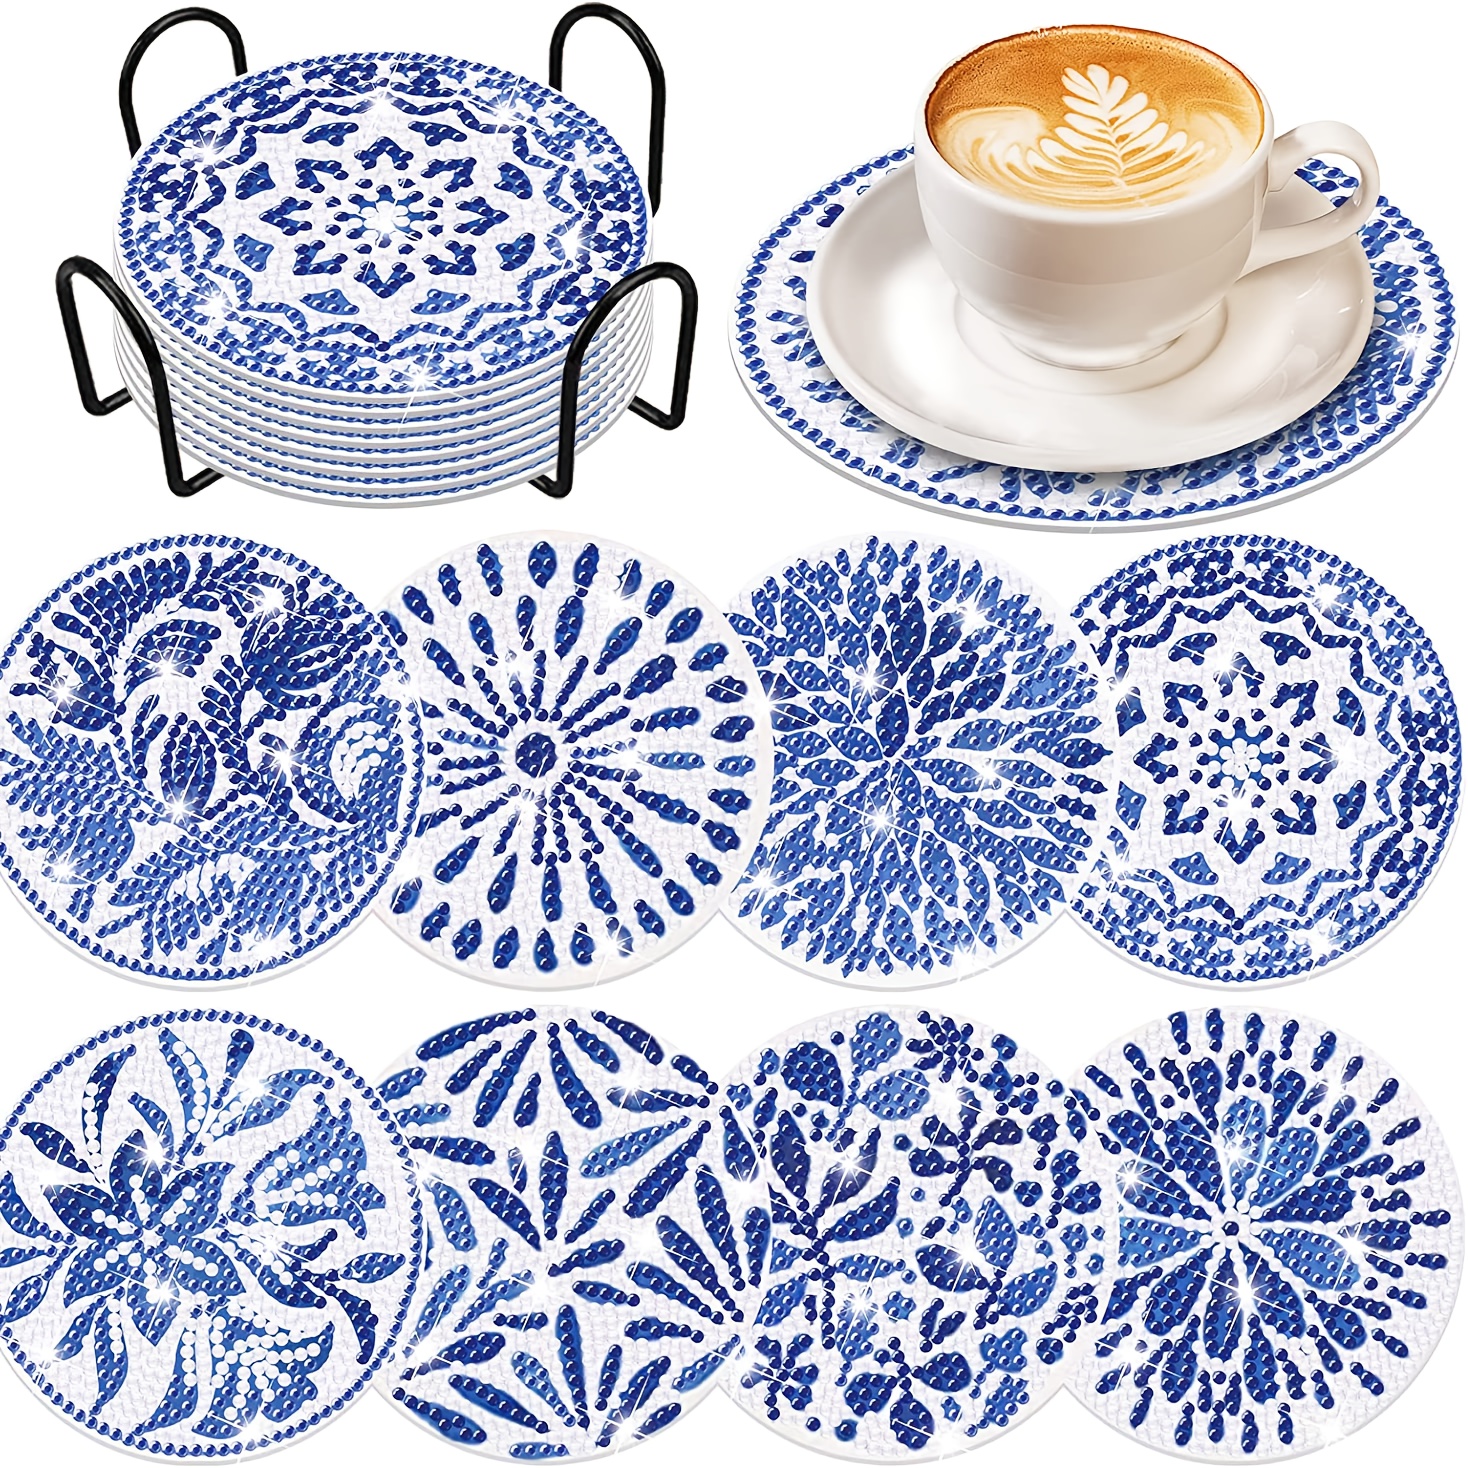 

8 Pieces Of Blue And White Porcelain Diamond Painting Coasters With Brackets, Diy Diamond Art Coaster Set, Suitable For Beginner Art And Craft Supplies